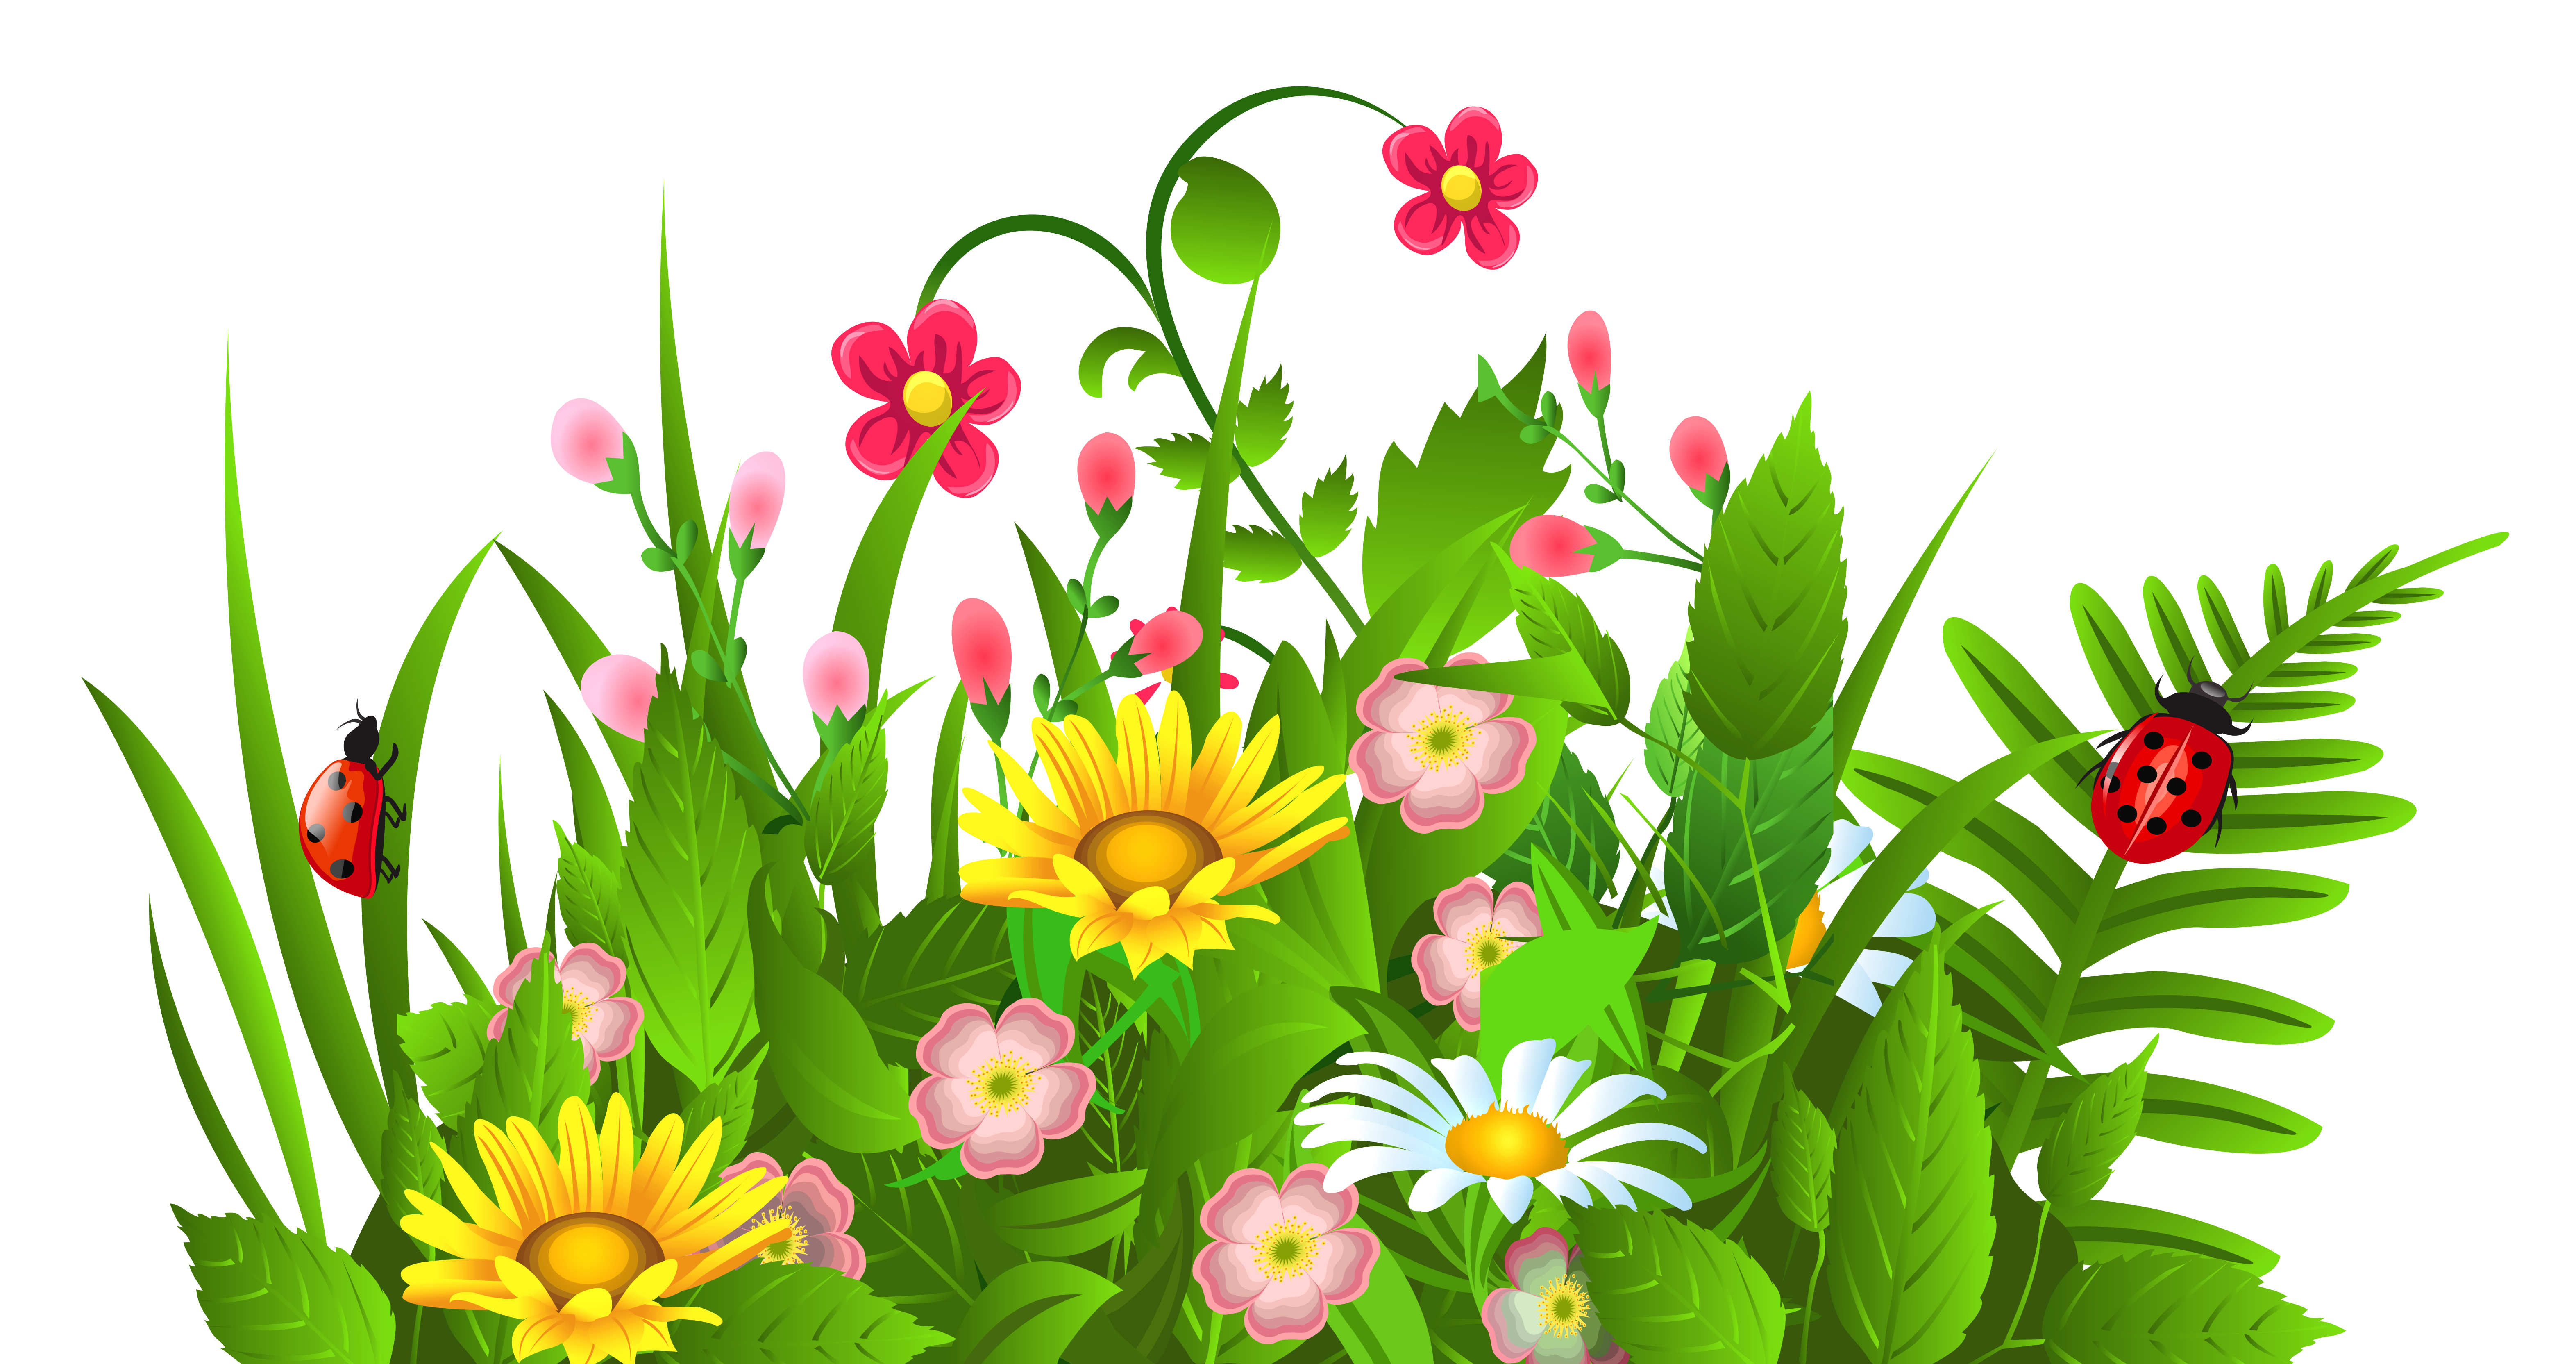 Flower clipart summer. Free images of flowers